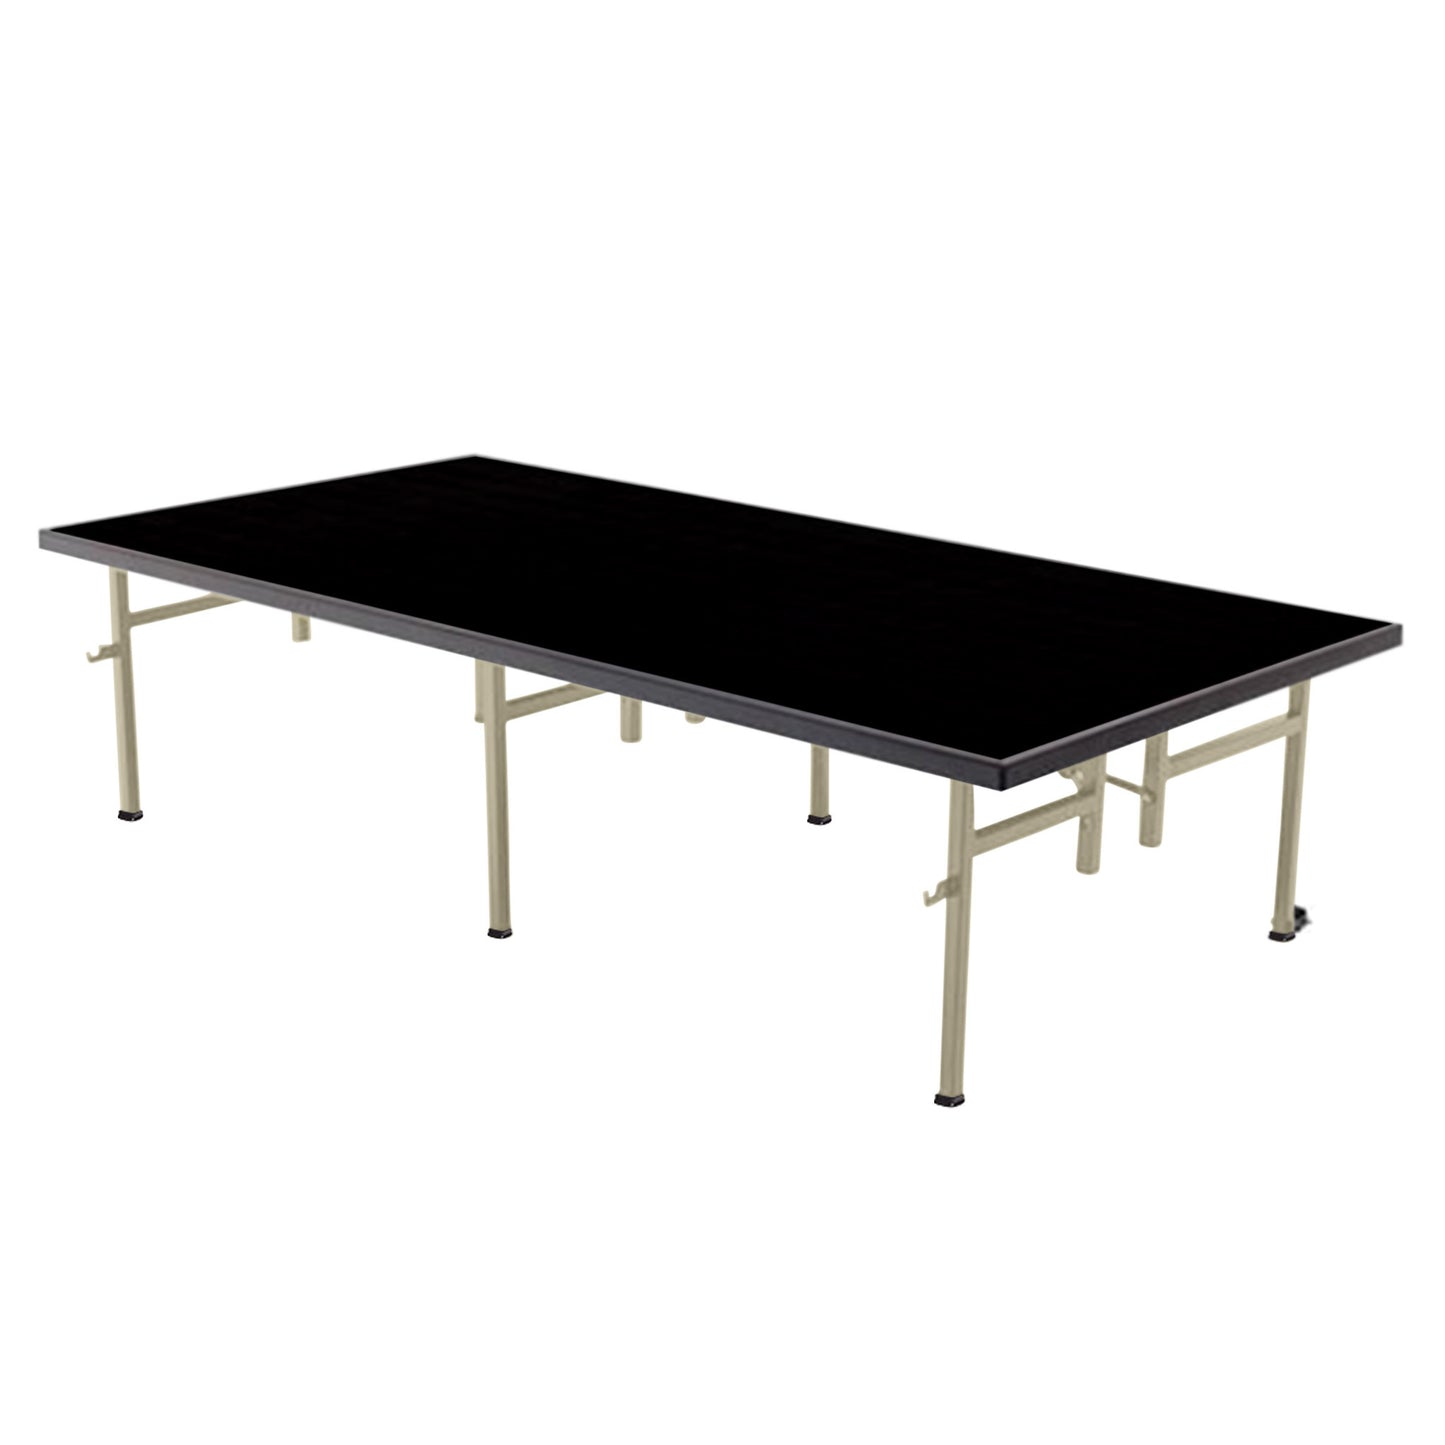 AmTab Fixed Height Stage - Polypropylene Top - 48"W x 72"L x 8"H  (AmTab AMT-ST4608P)